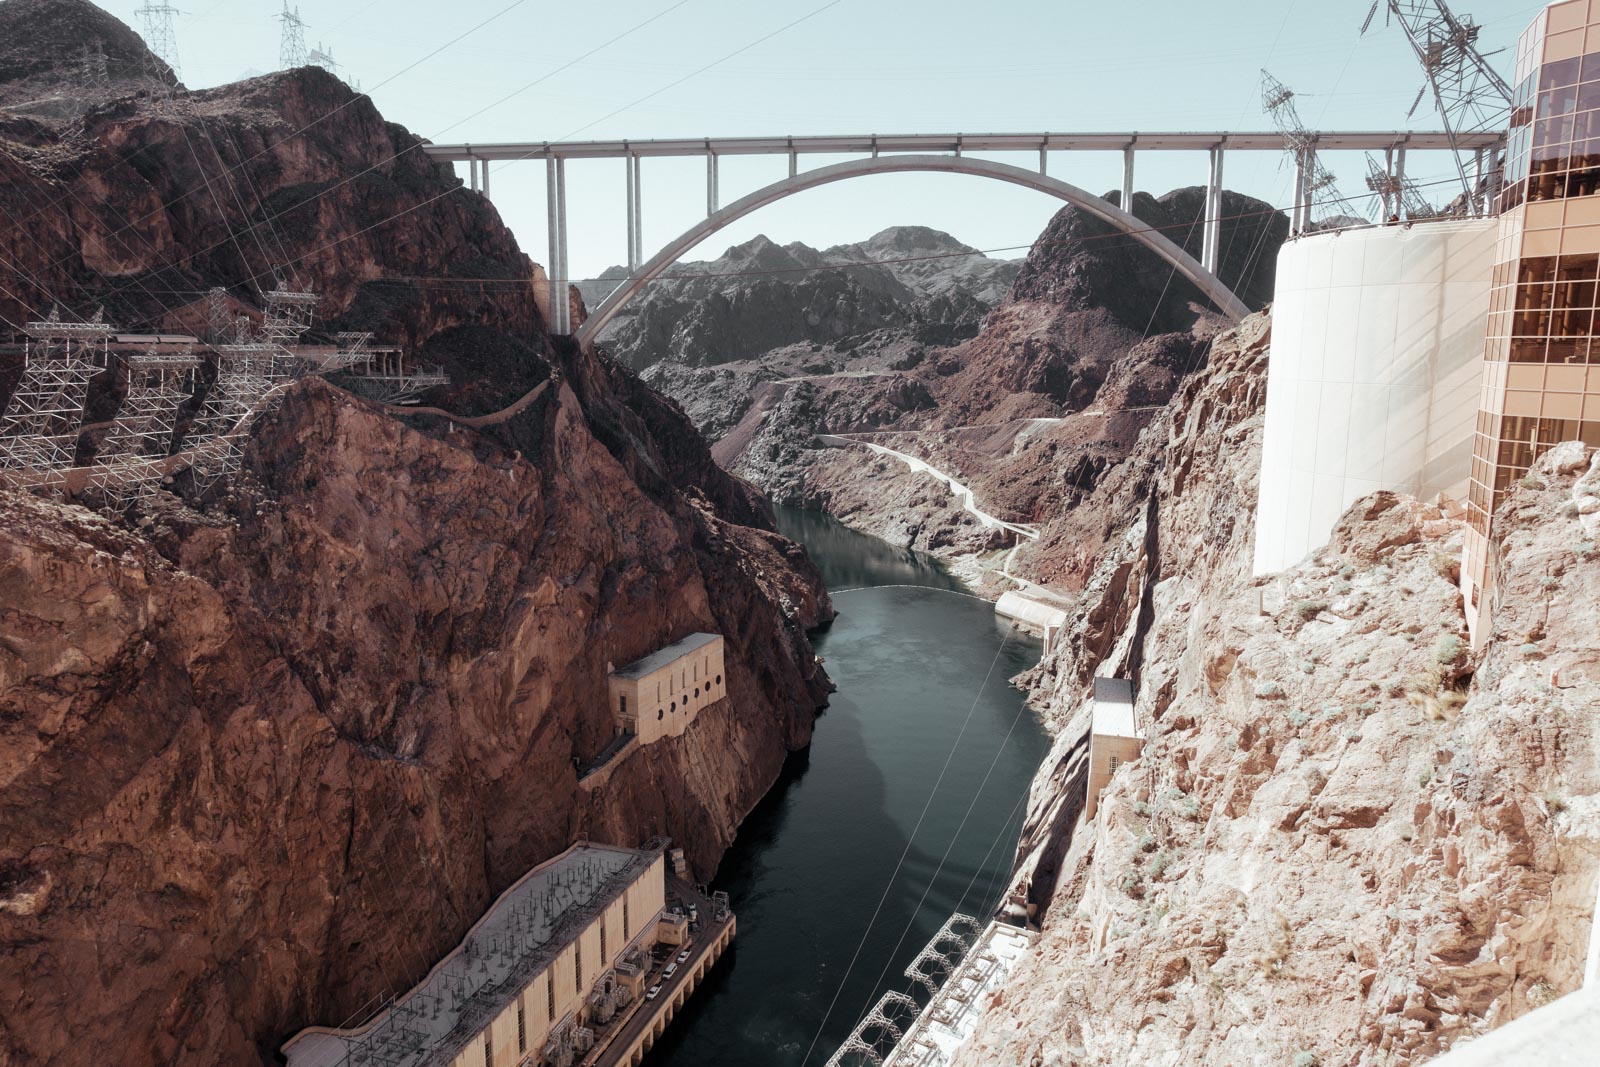 Bypass Bridge at the Hoover Dam on a recent trip to Las Vegas